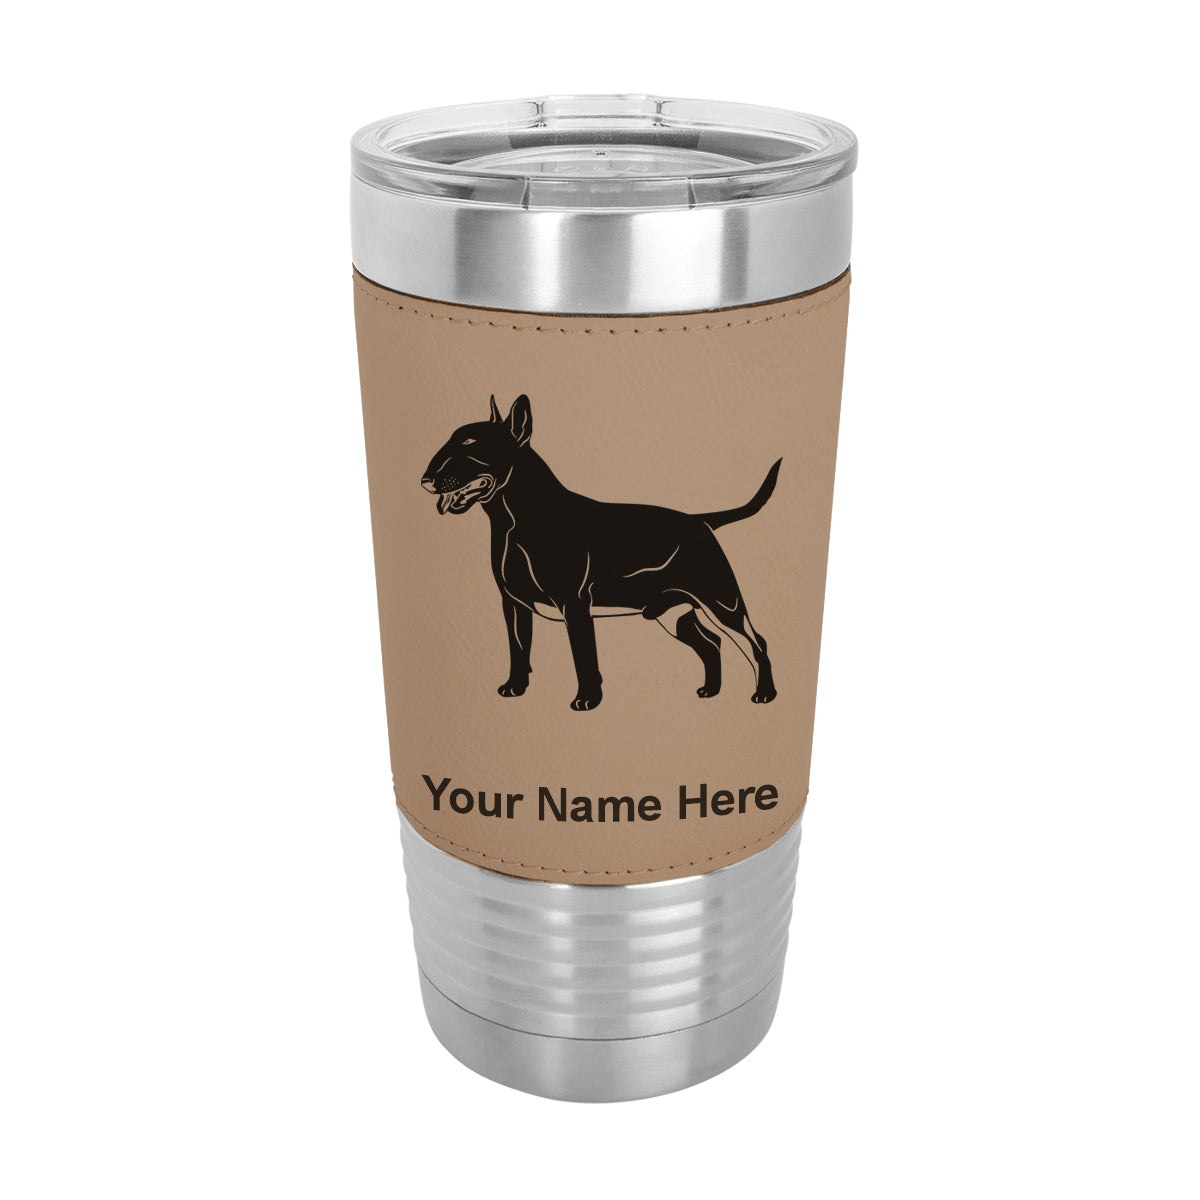 20oz Faux Leather Tumbler Mug, Bull Terrier Dog, Personalized Engraving Included - LaserGram Custom Engraved Gifts